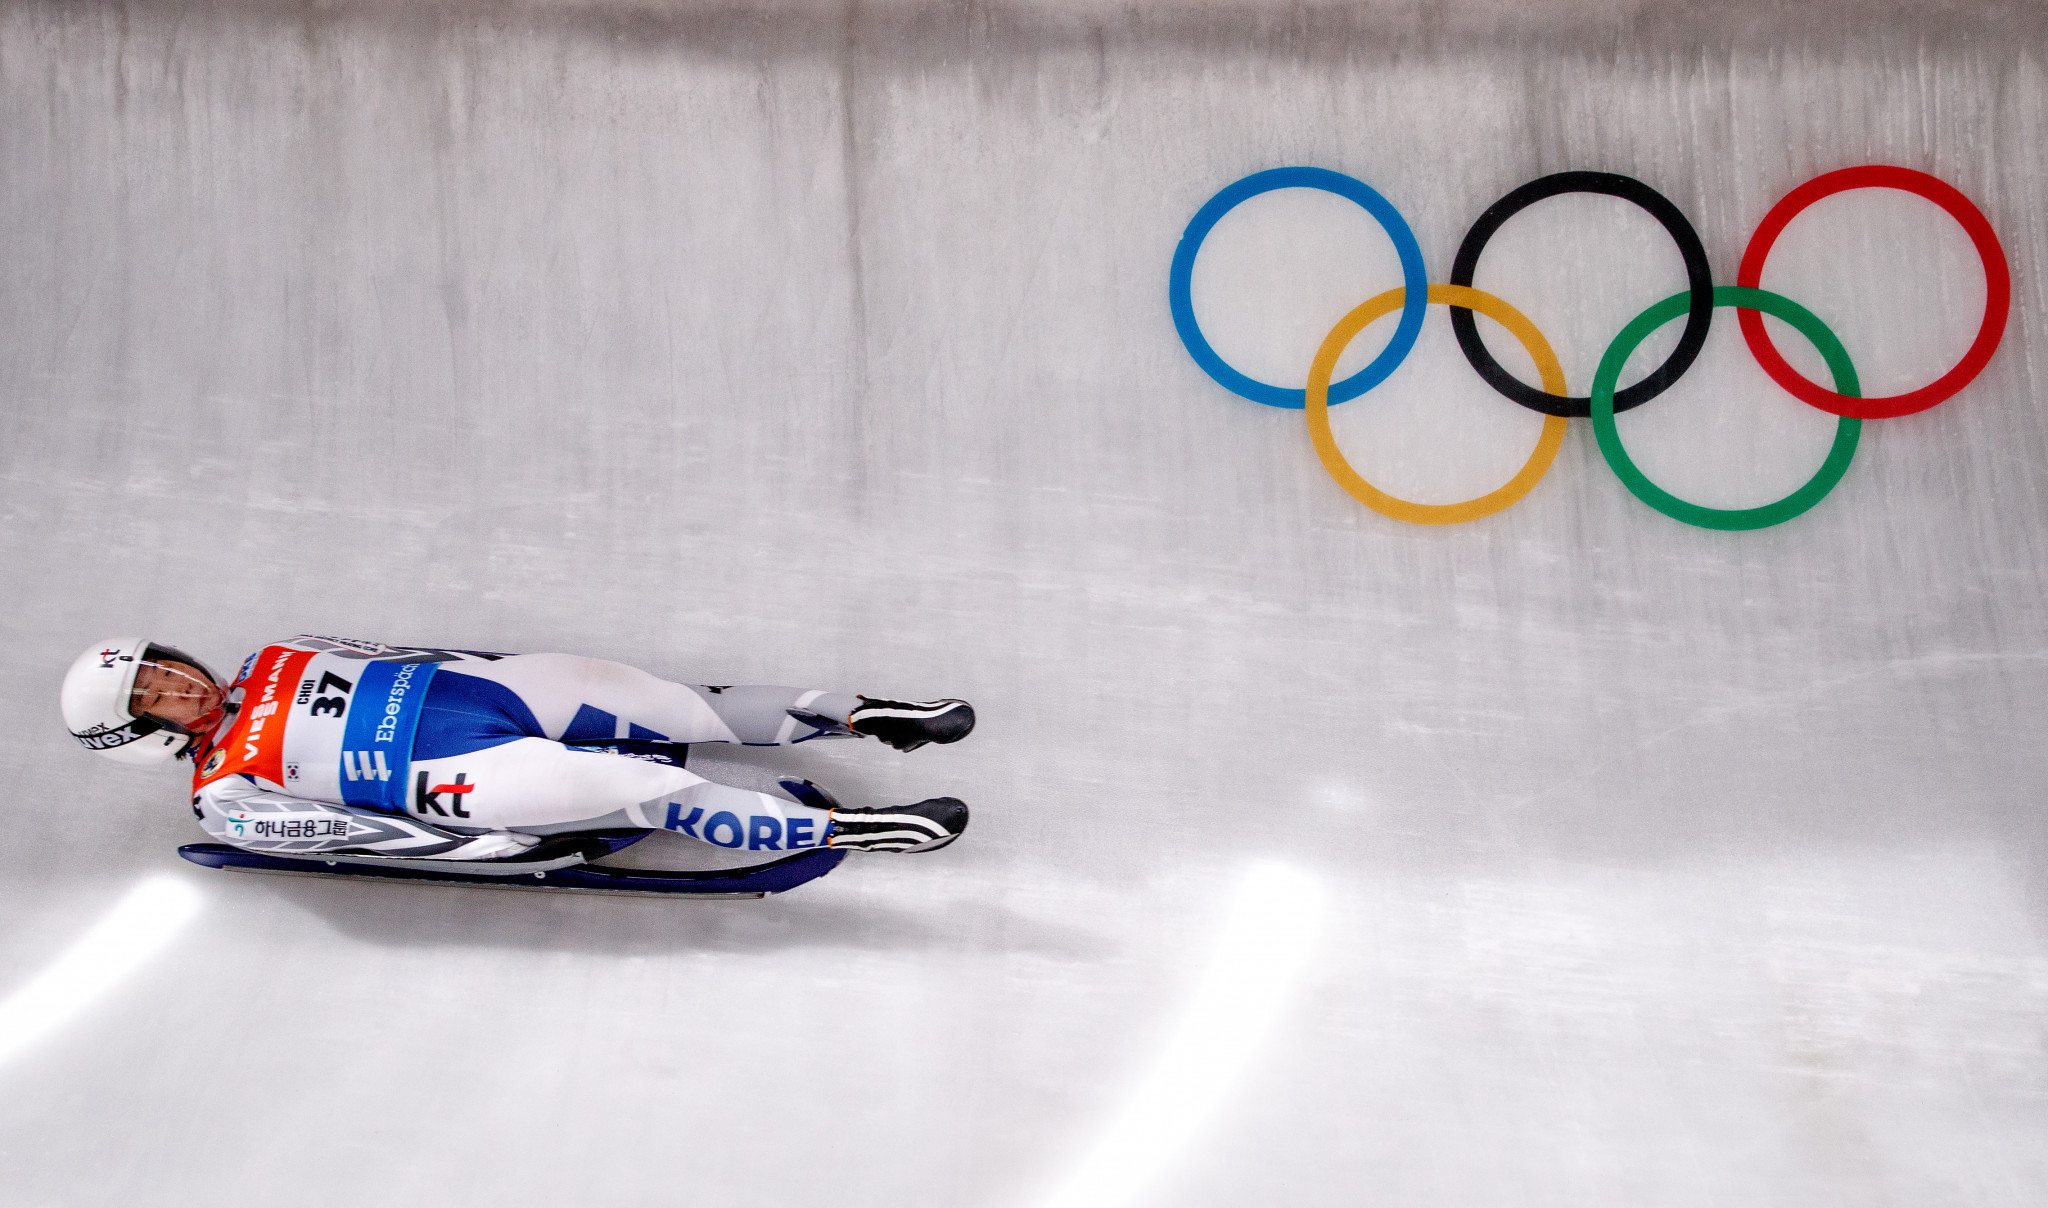 Training runs have begun at the Olympic Sliding Centre ©Getty Images